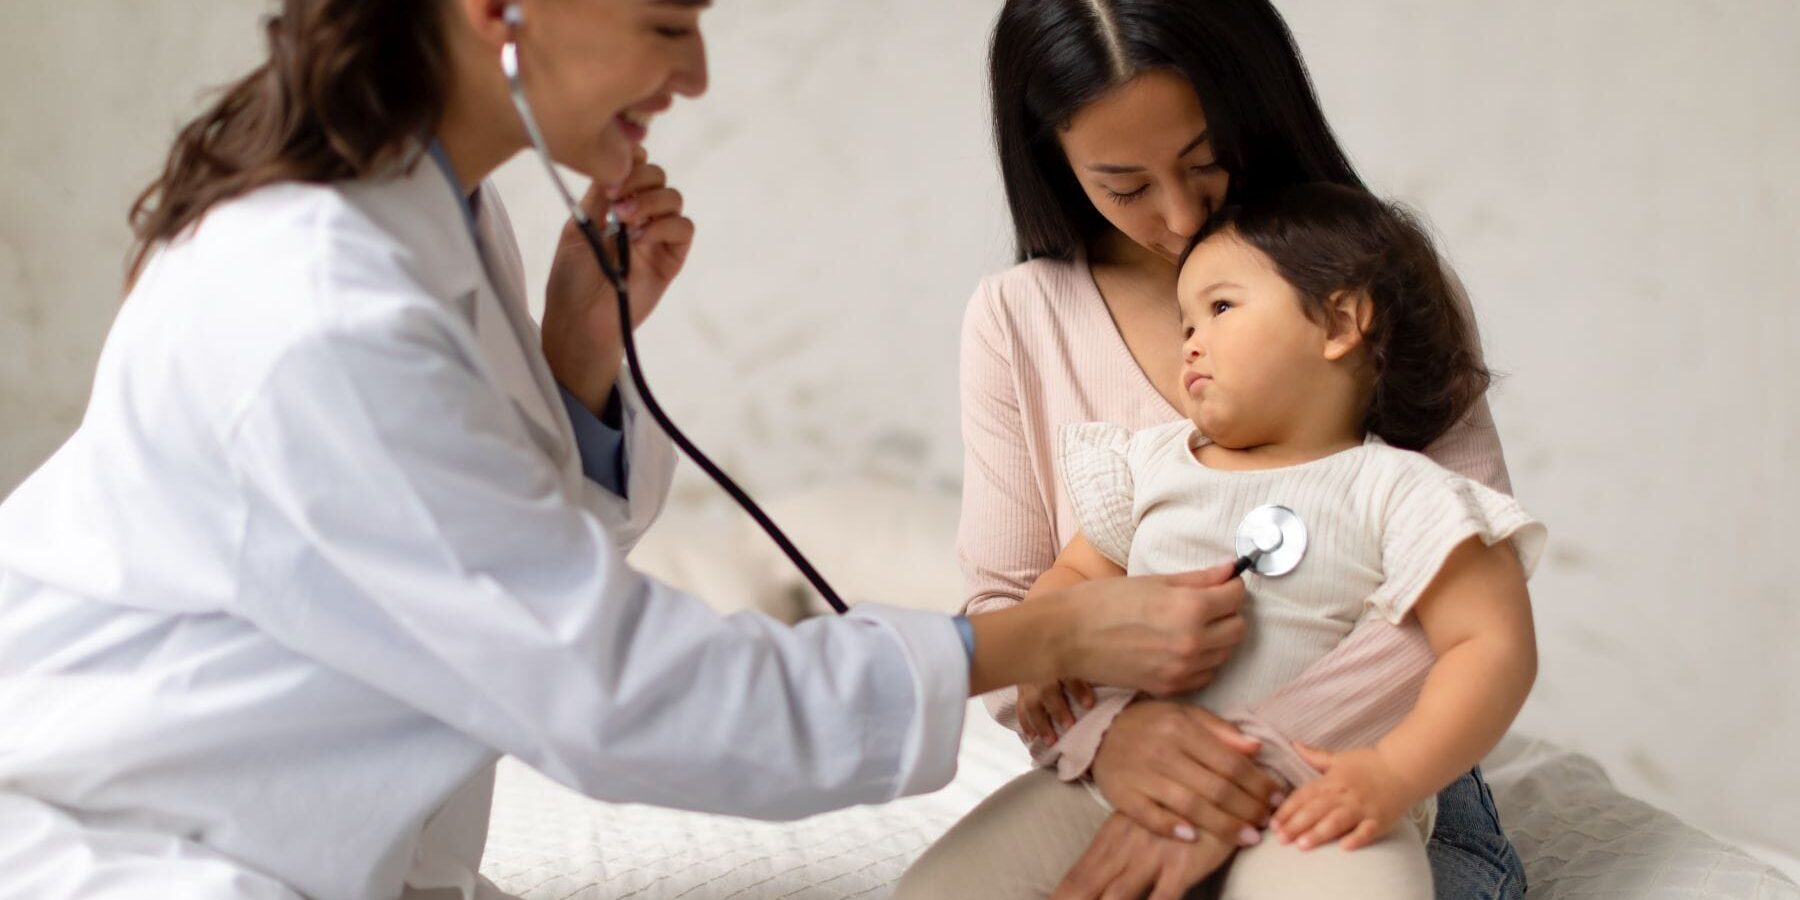 Pediatrician Lady Listening To Korean Infant Child's Heartbeat Pressing Stethoscope To Little Girl's Chest During Medical Checkup Indoors. Mom And Toddler Daughter Visiting Clinic. Selective Focus